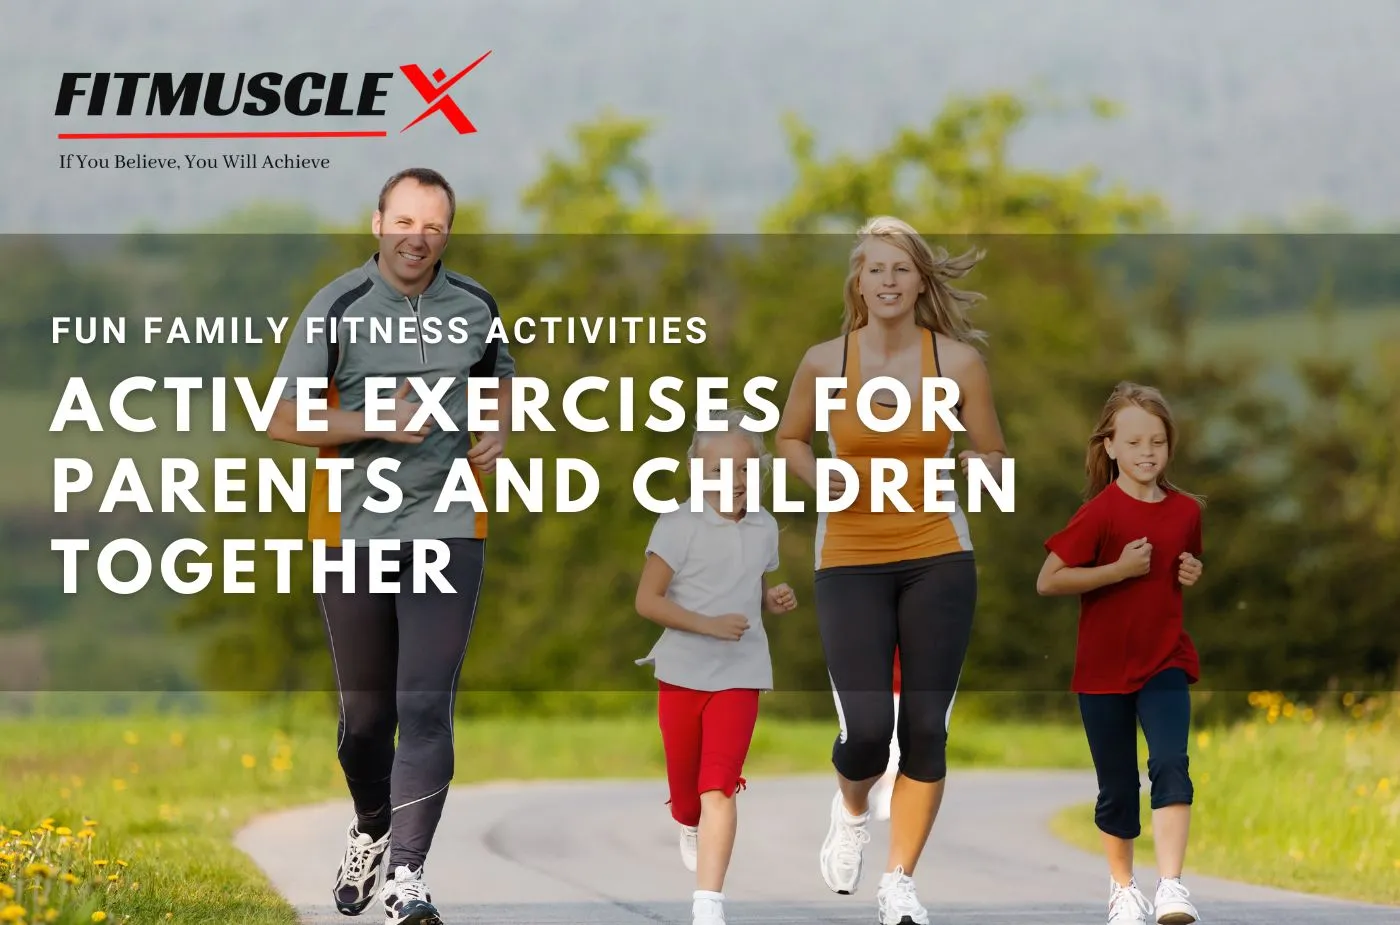 Fun Family Fitness Activities Active Exercises for Parents and Children Together